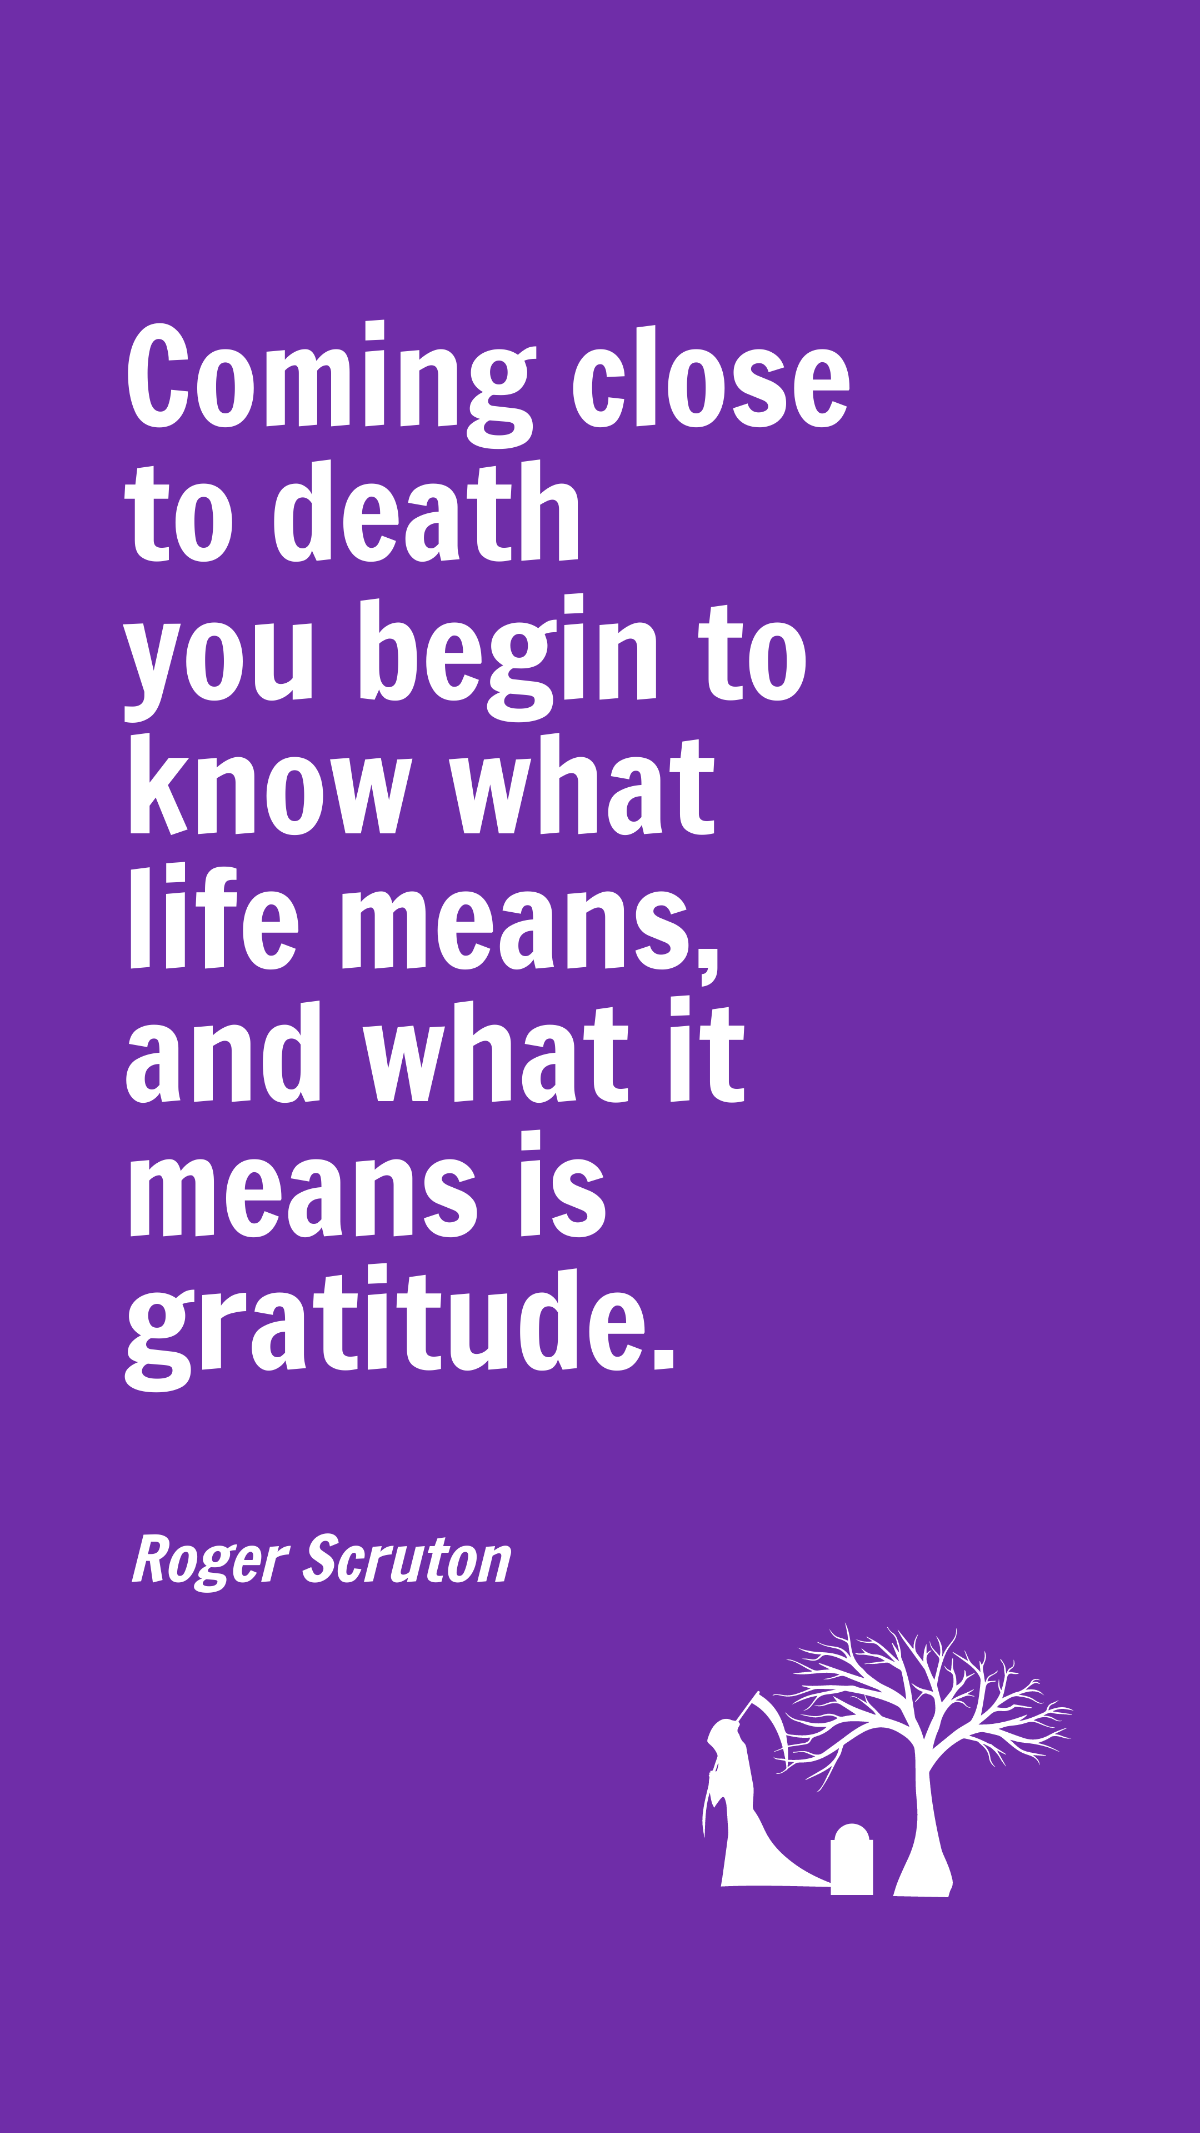 Roger Scruton - Coming close to death you begin to know what life means, and what it means is gratitude.